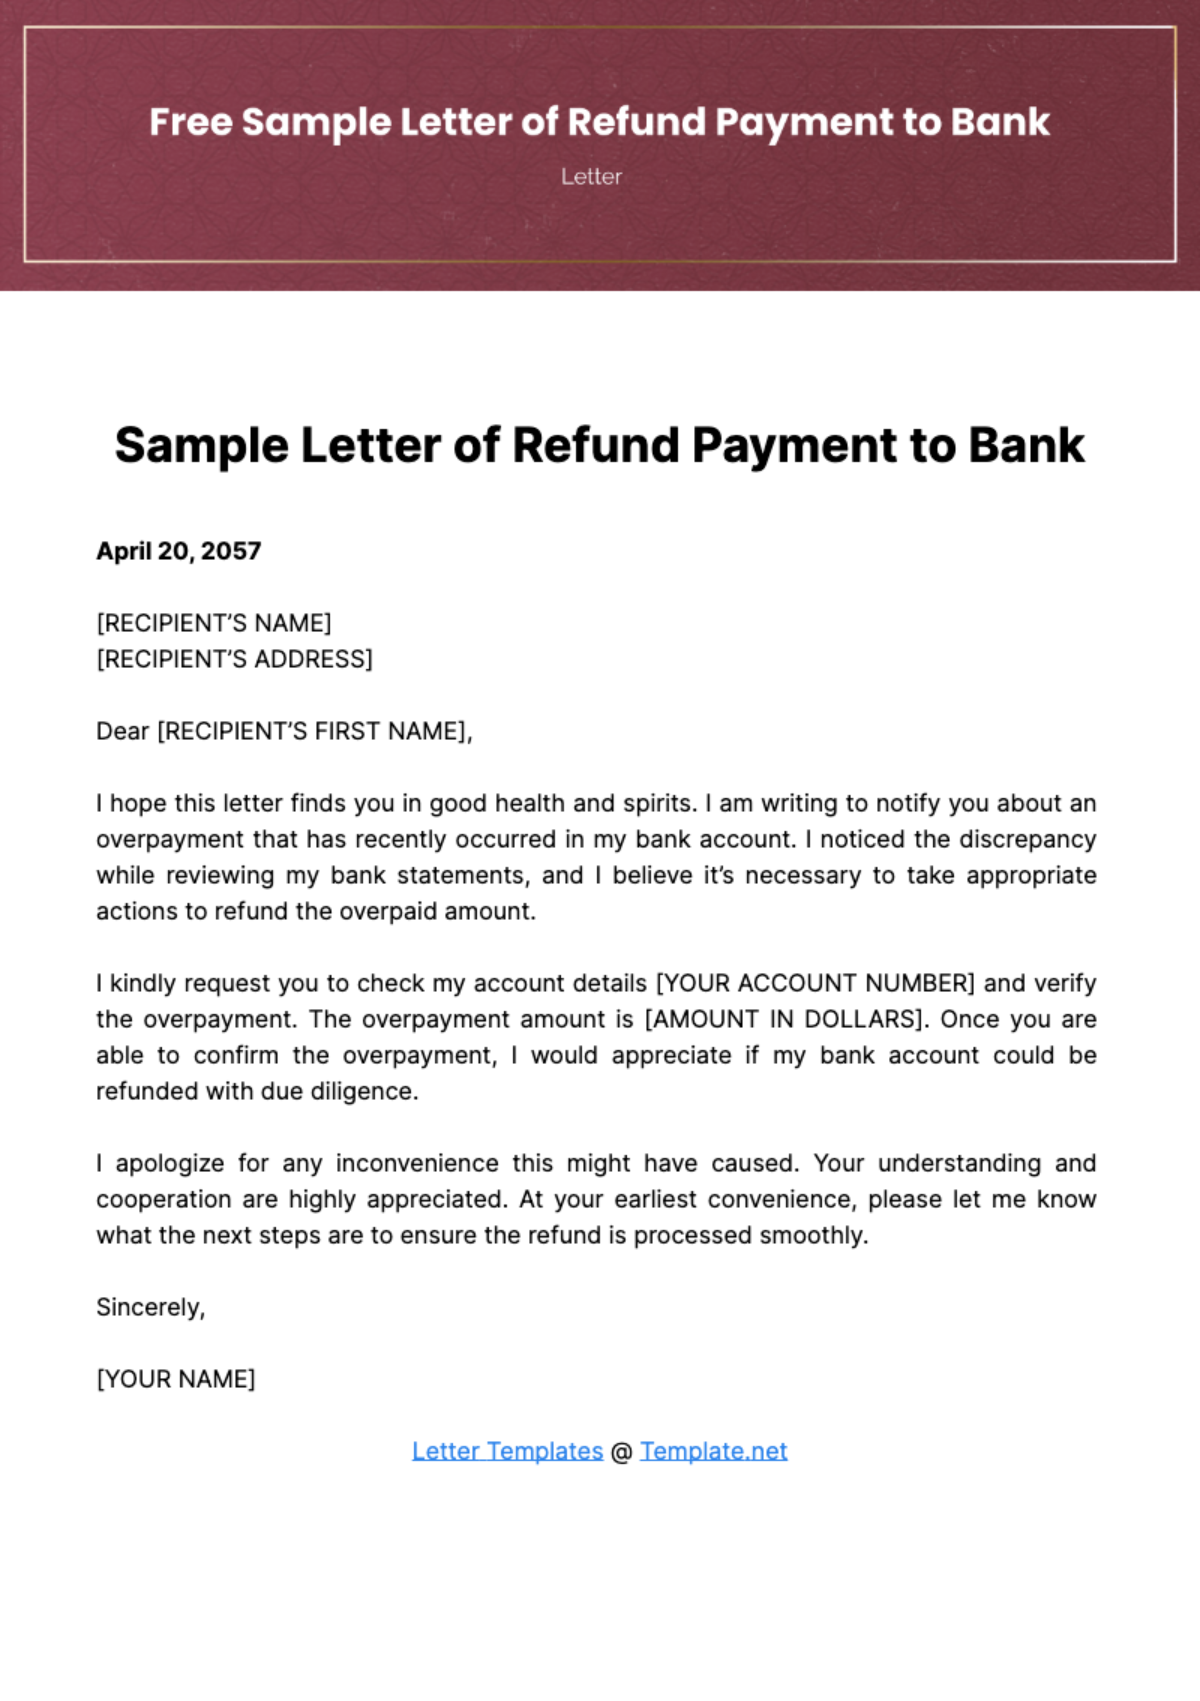 Free Sample Letter of Refund Payment to Bank Template